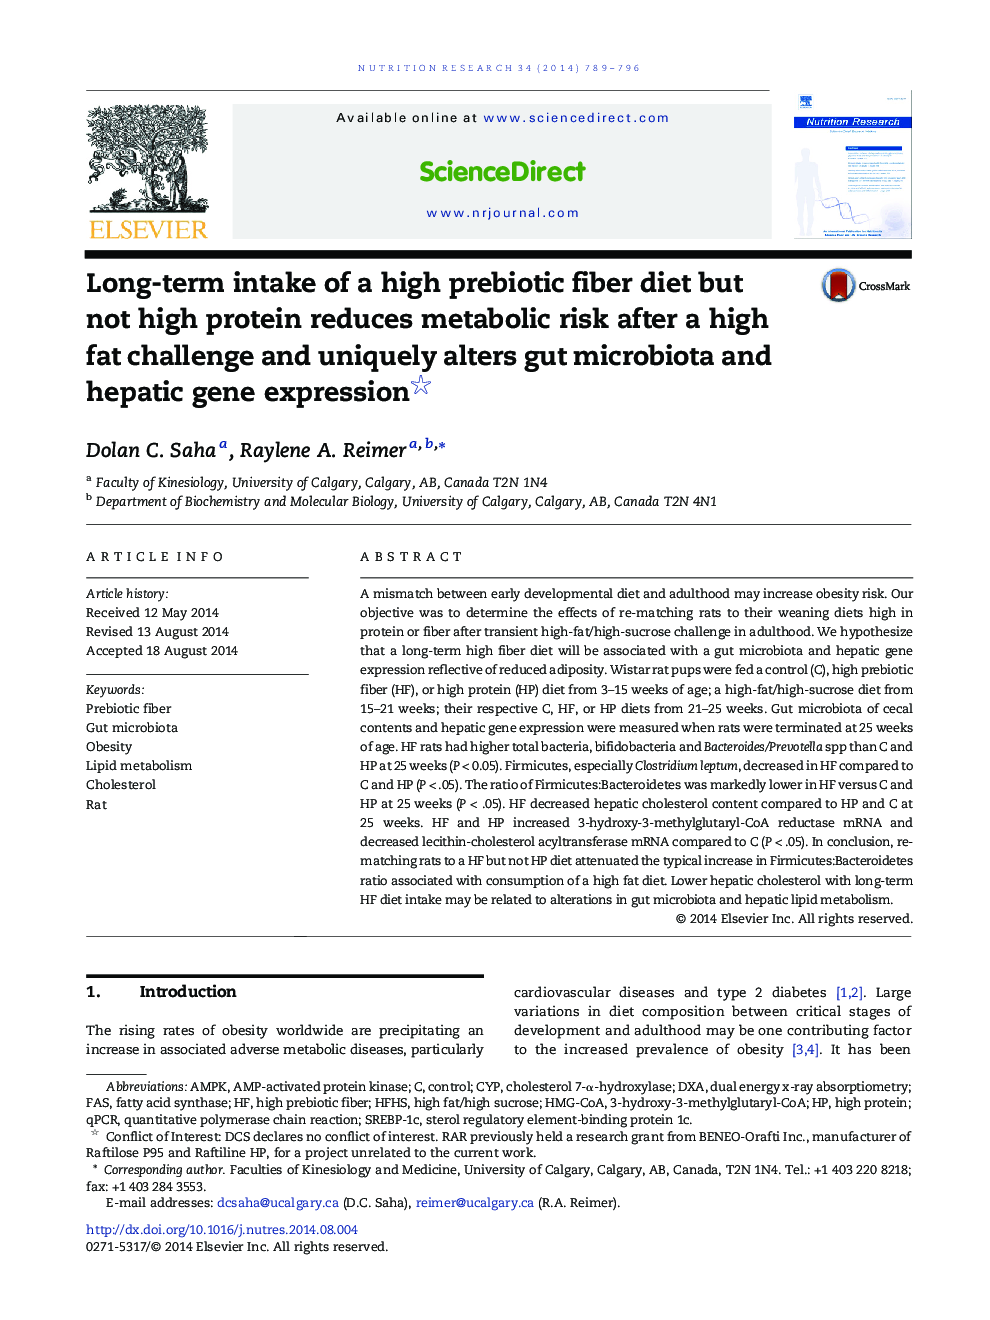 Long-term intake of a high prebiotic fiber diet but not high protein reduces metabolic risk after a high fat challenge and uniquely alters gut microbiota and hepatic gene expression 